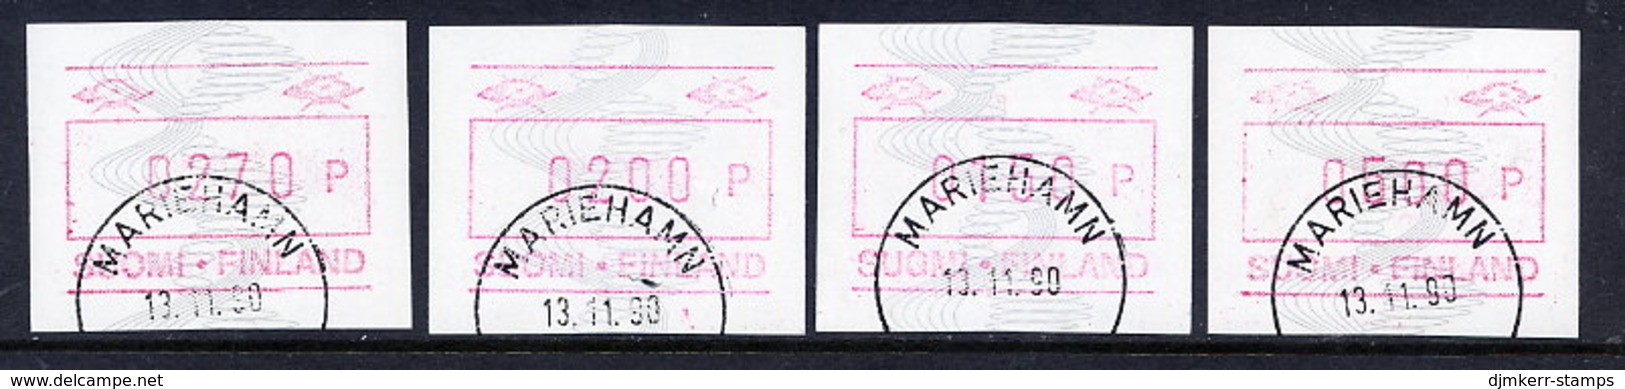 FINLAND 1990 Definitive Without ATM Number , 4 Different Values Used.  Michel 7 - Machine Labels [ATM]